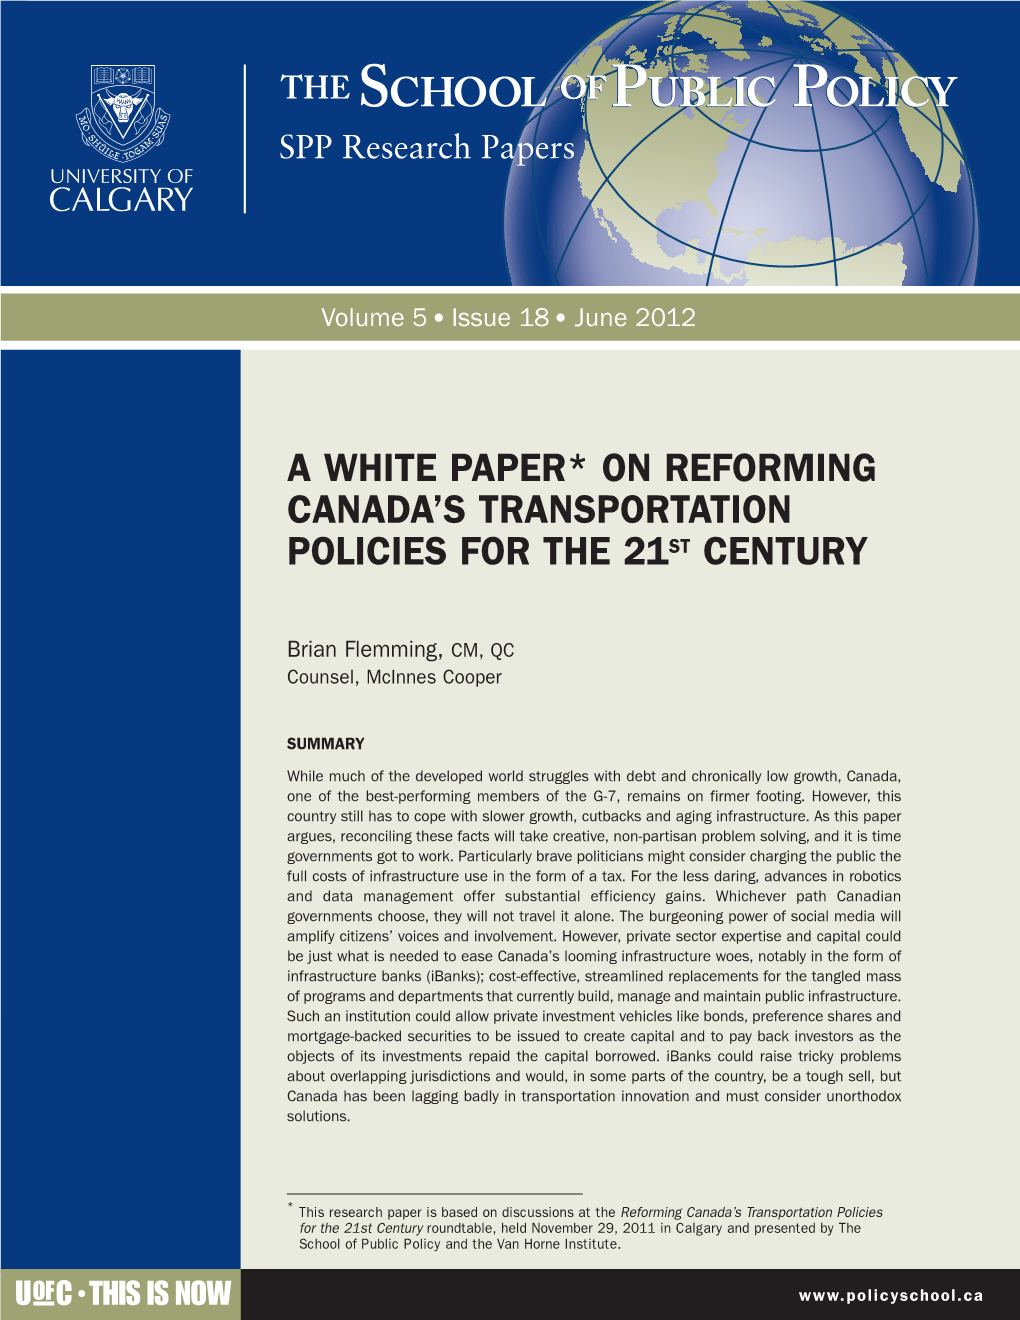 A White Paper* on Reforming Canada's